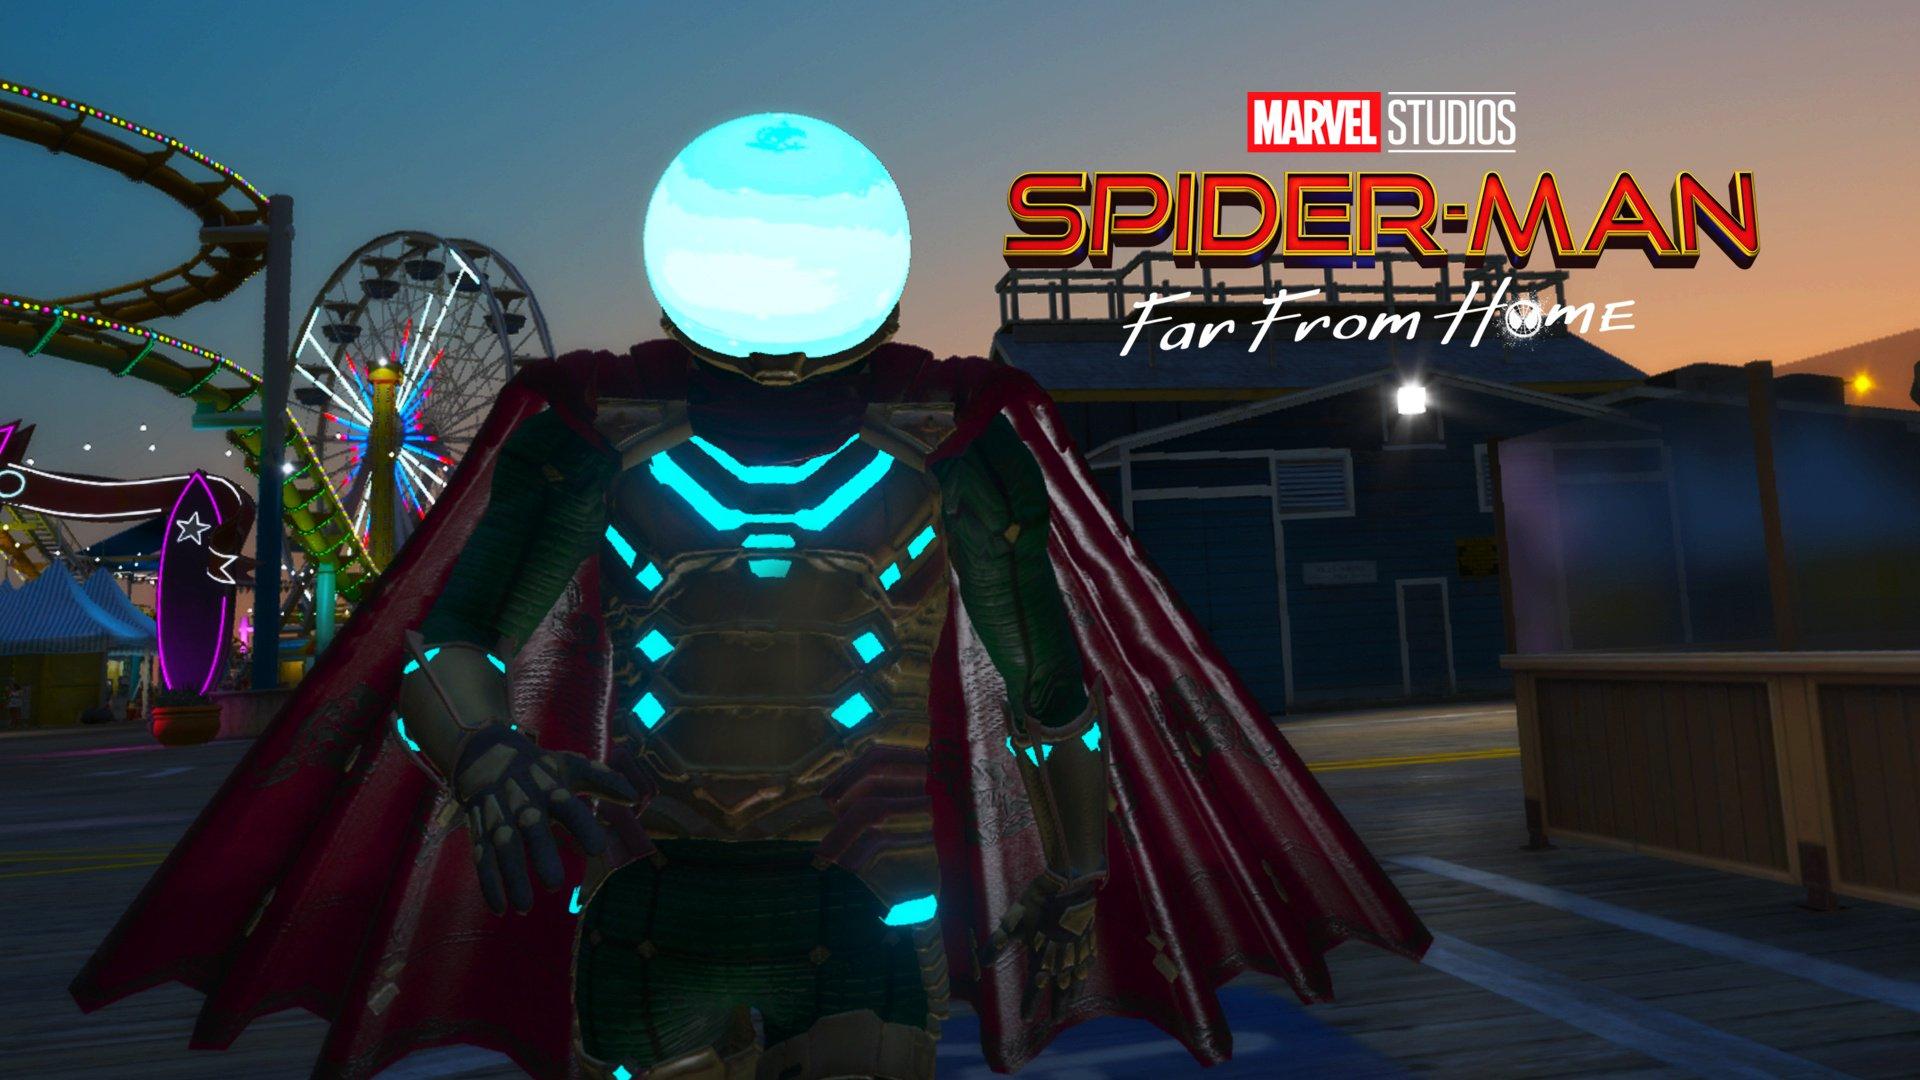 Mysterio (Spider Man Far From Home)